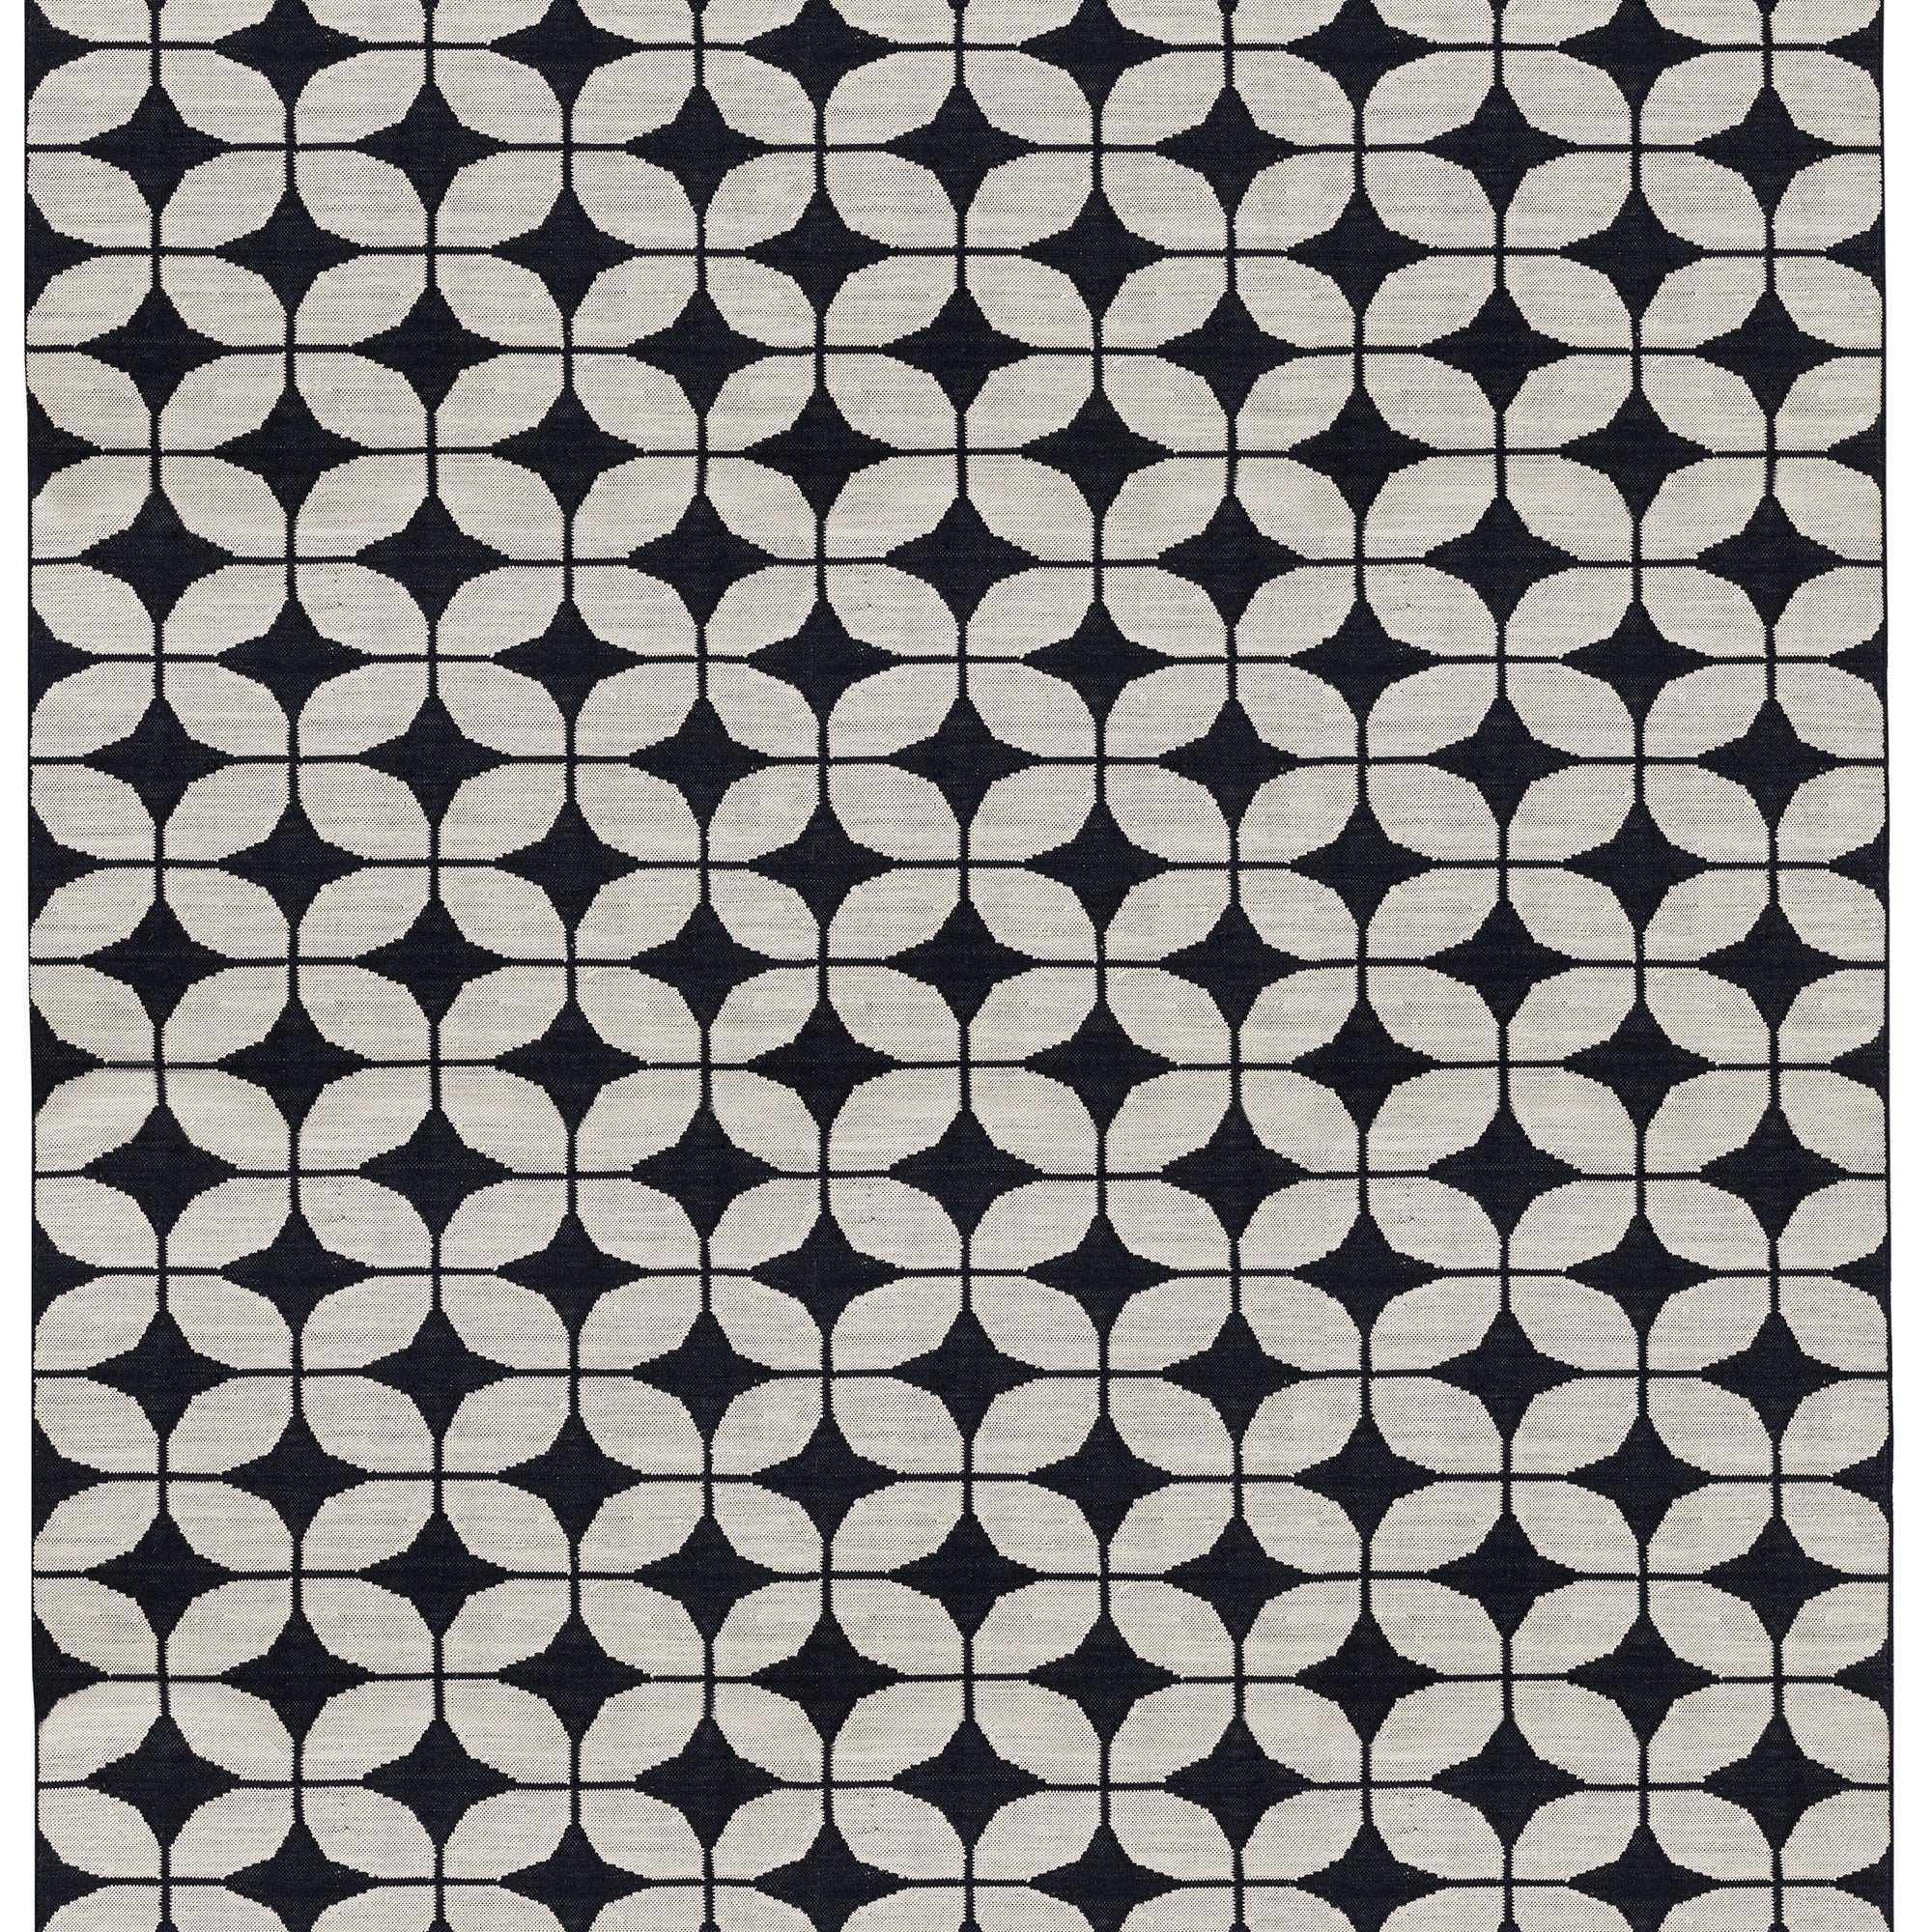 Full size Alhambra Rug in black and white a featuring a pattern of linked circles that create a star like lattice.